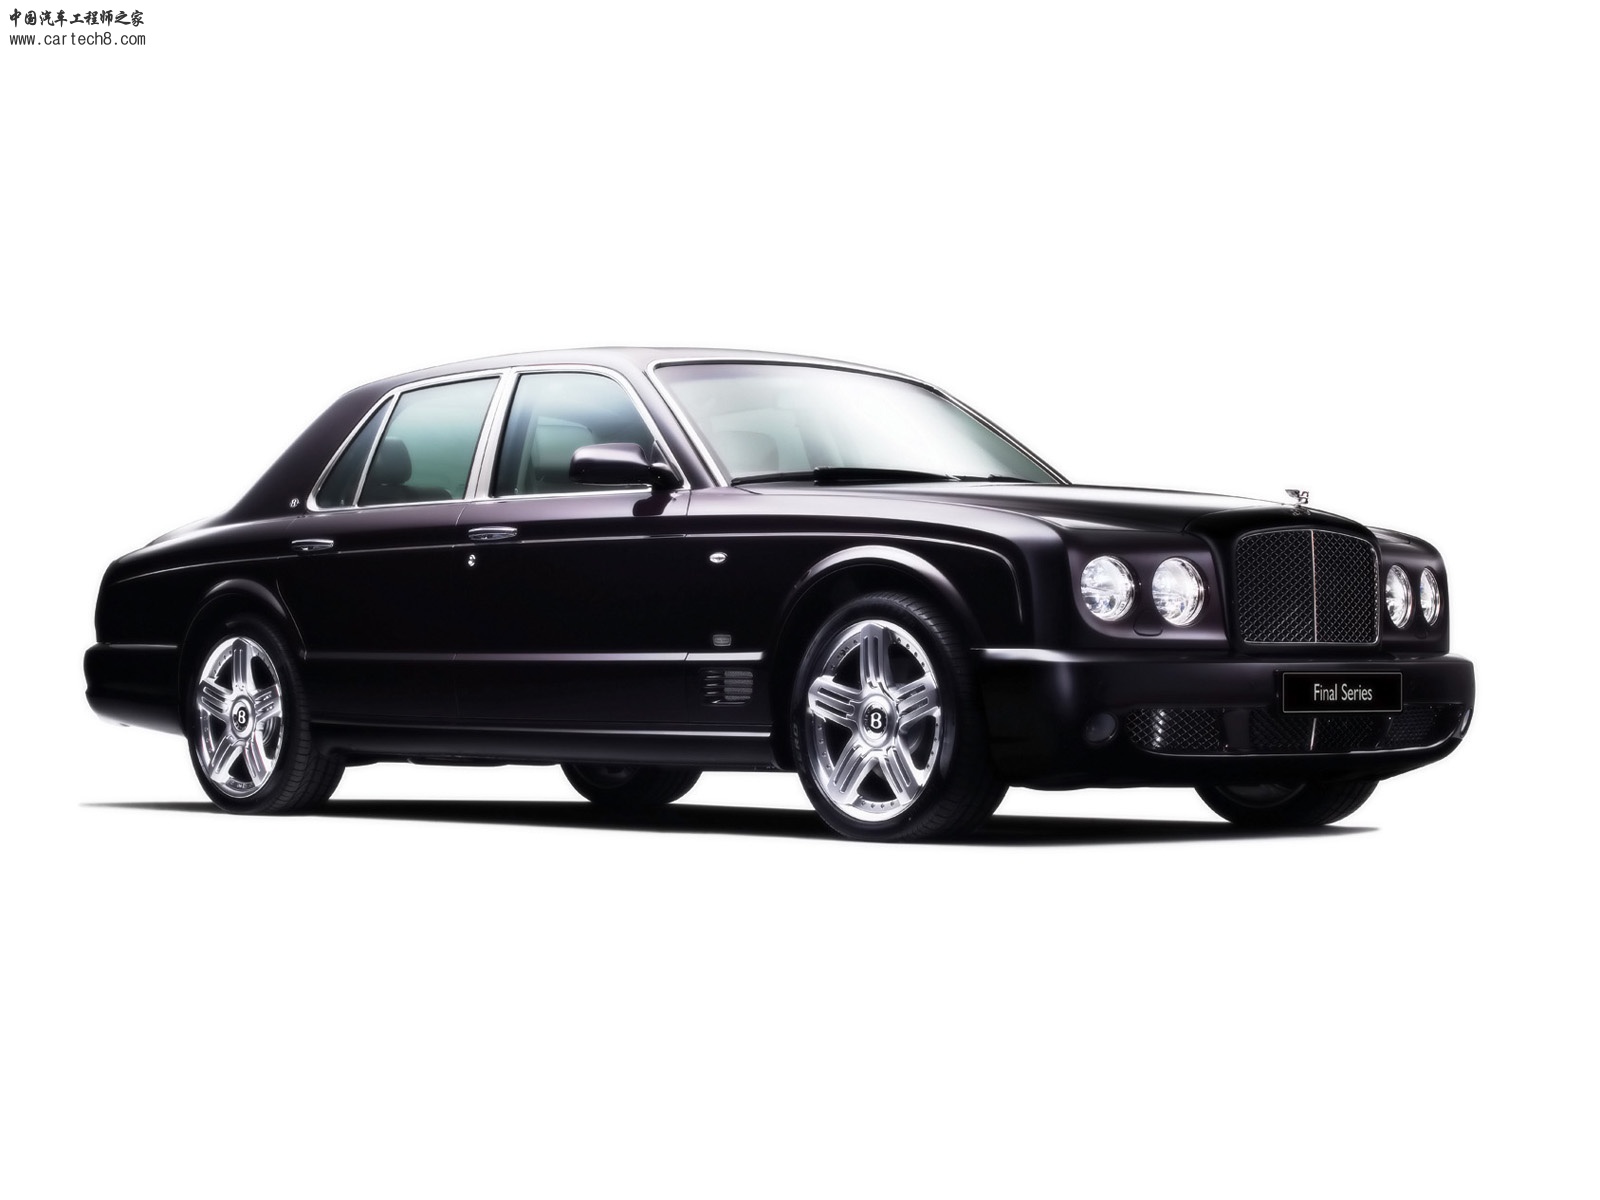 2009-Bentley-Arnage-Final-Series-Front-And-Side-1600x1200.jpg